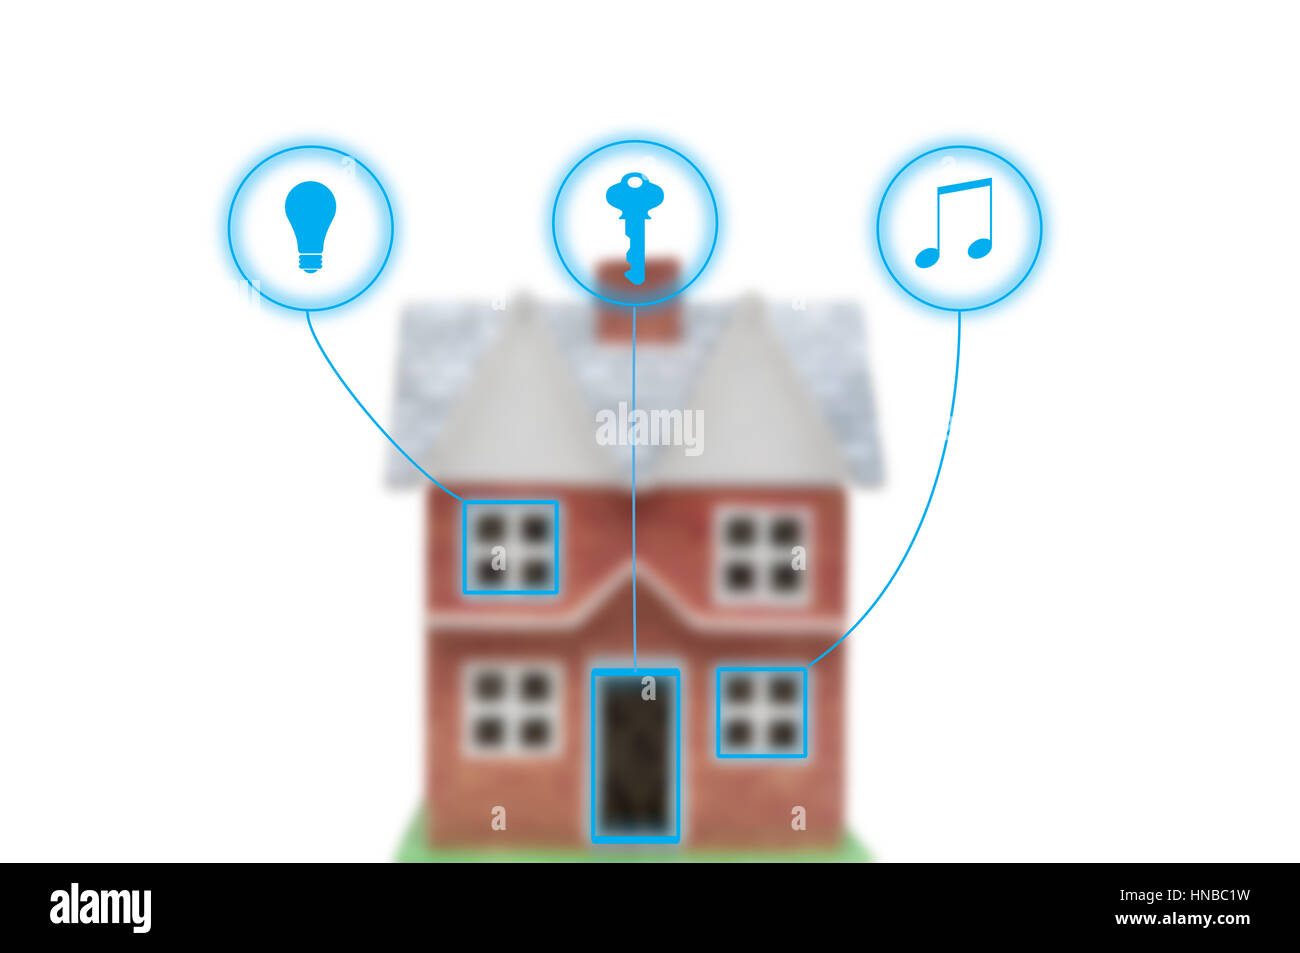 smart house concept with icons for remote control by smart phone Stock Photo